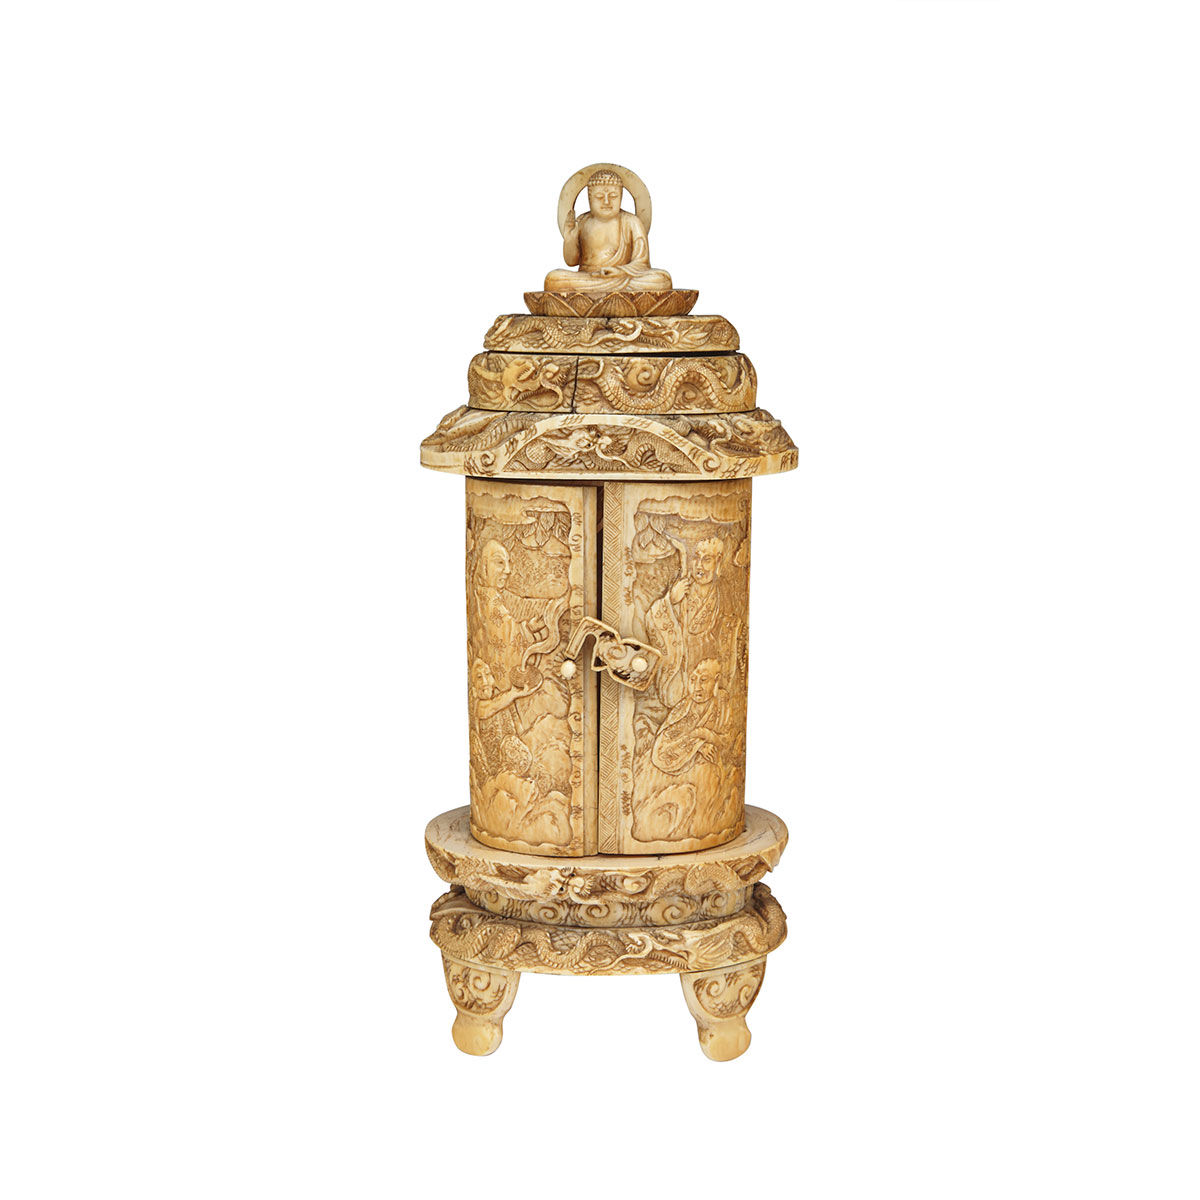 Stained Ivory Carved Portable Shrine, Meiji Period, Late 19th Century